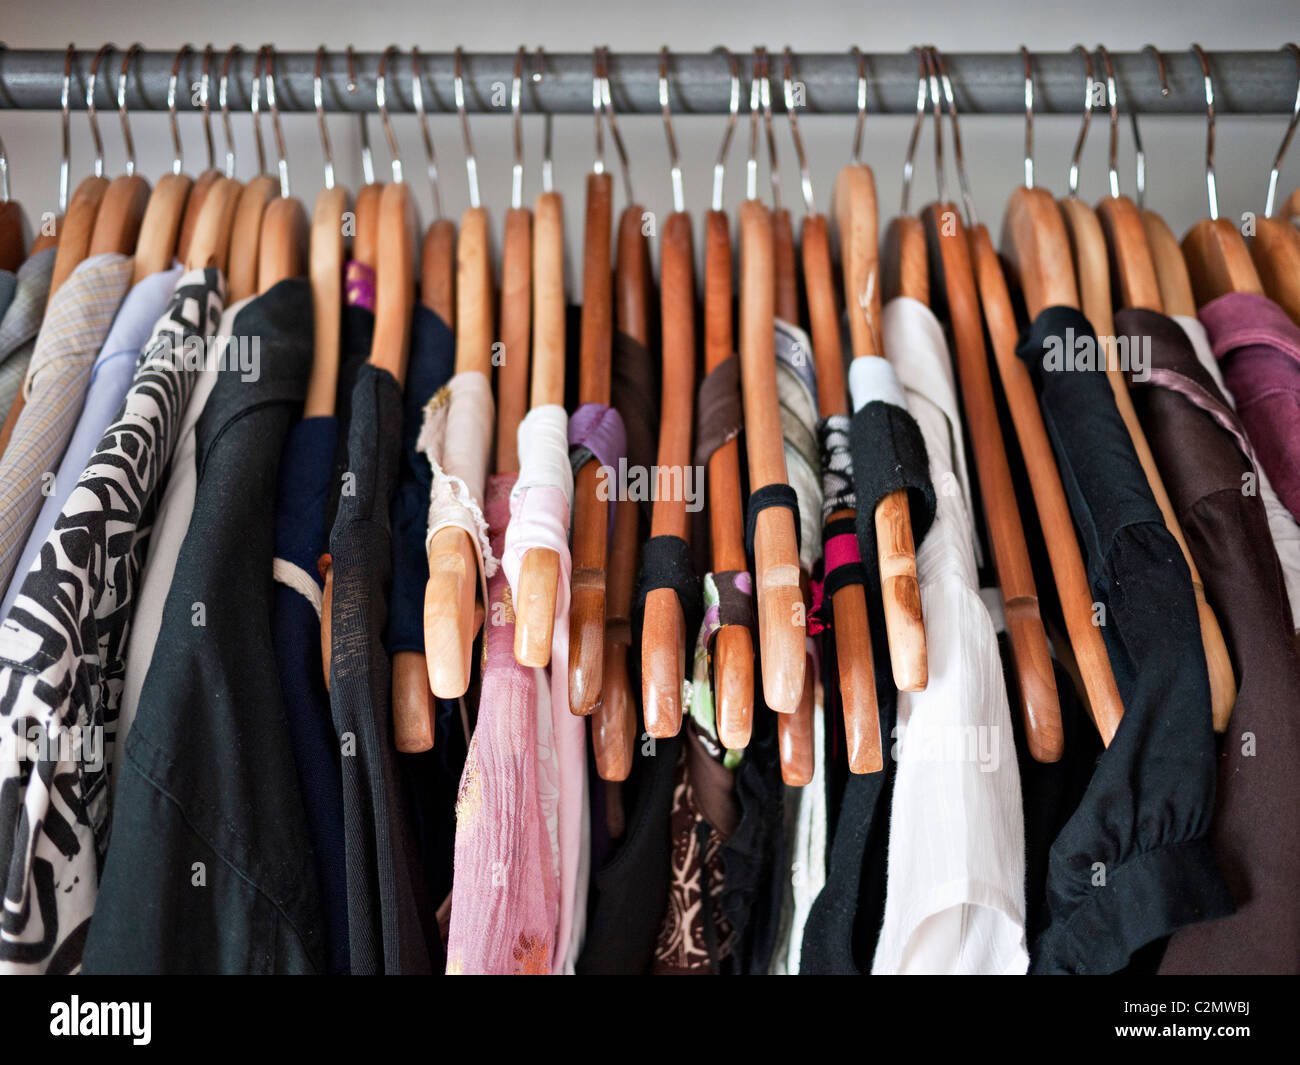 Clothes rail in cupboard, men's and women's clothing on wooden hangers Stock Photo